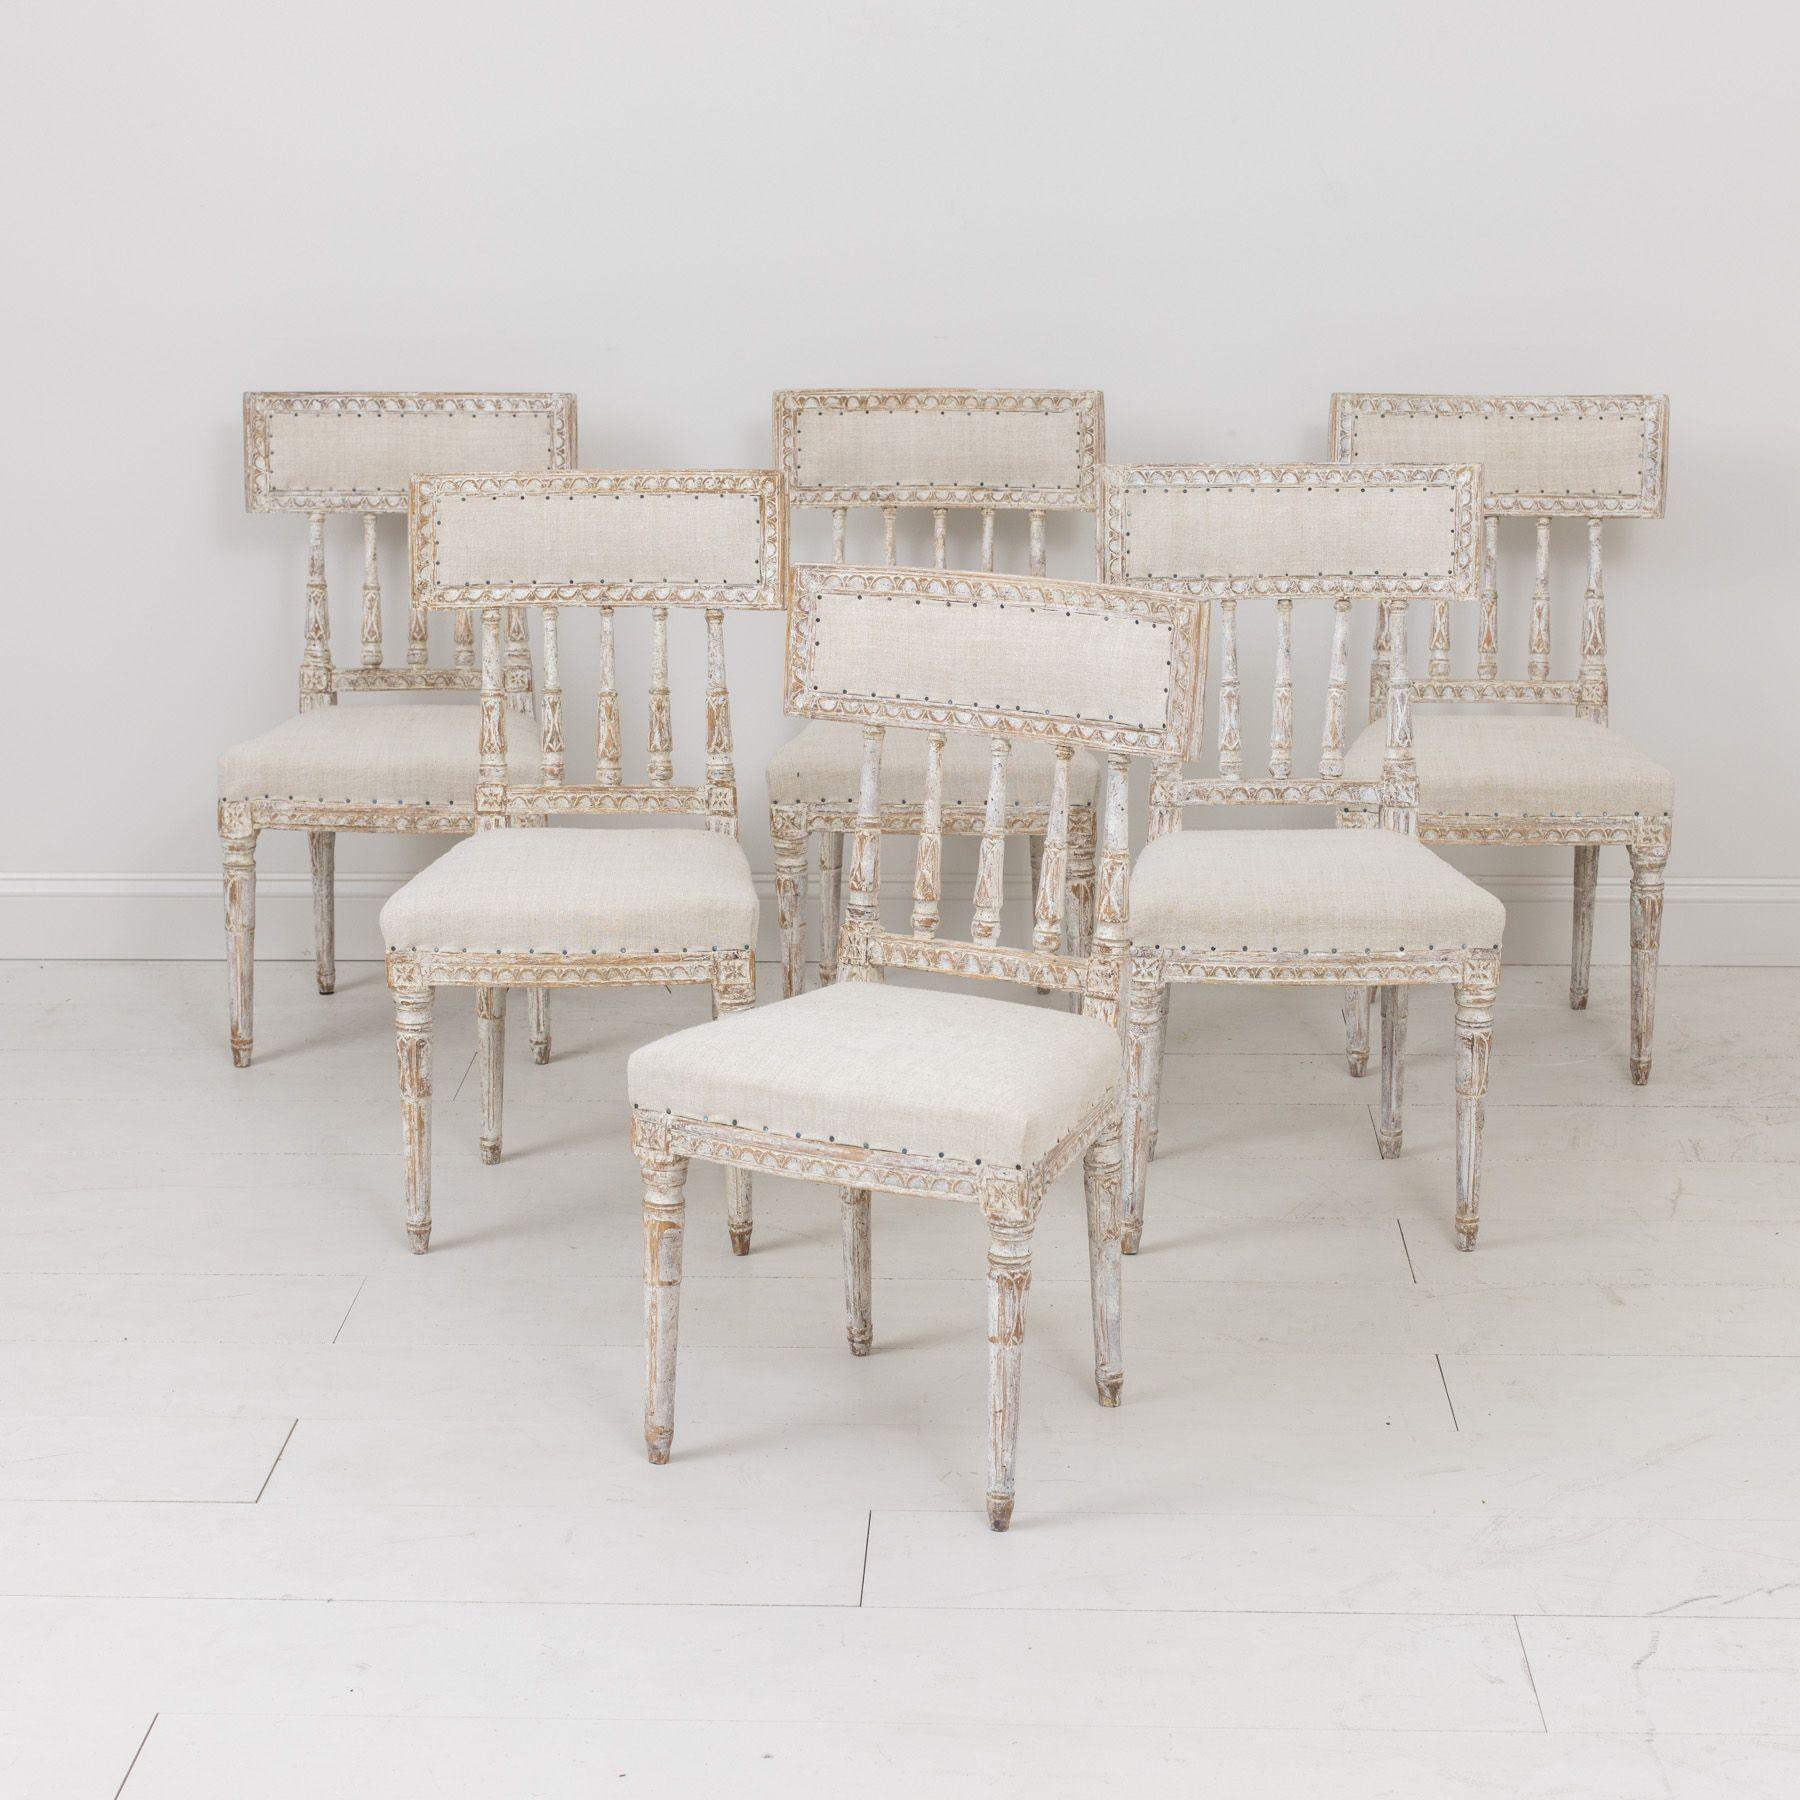 A set of six Swedish chairs from the Gustavian period in original ivory / taupe / gray paint, newly upholstered in antique linen. These beautiful chairs have curved splat backs, inspired by antique Roman 